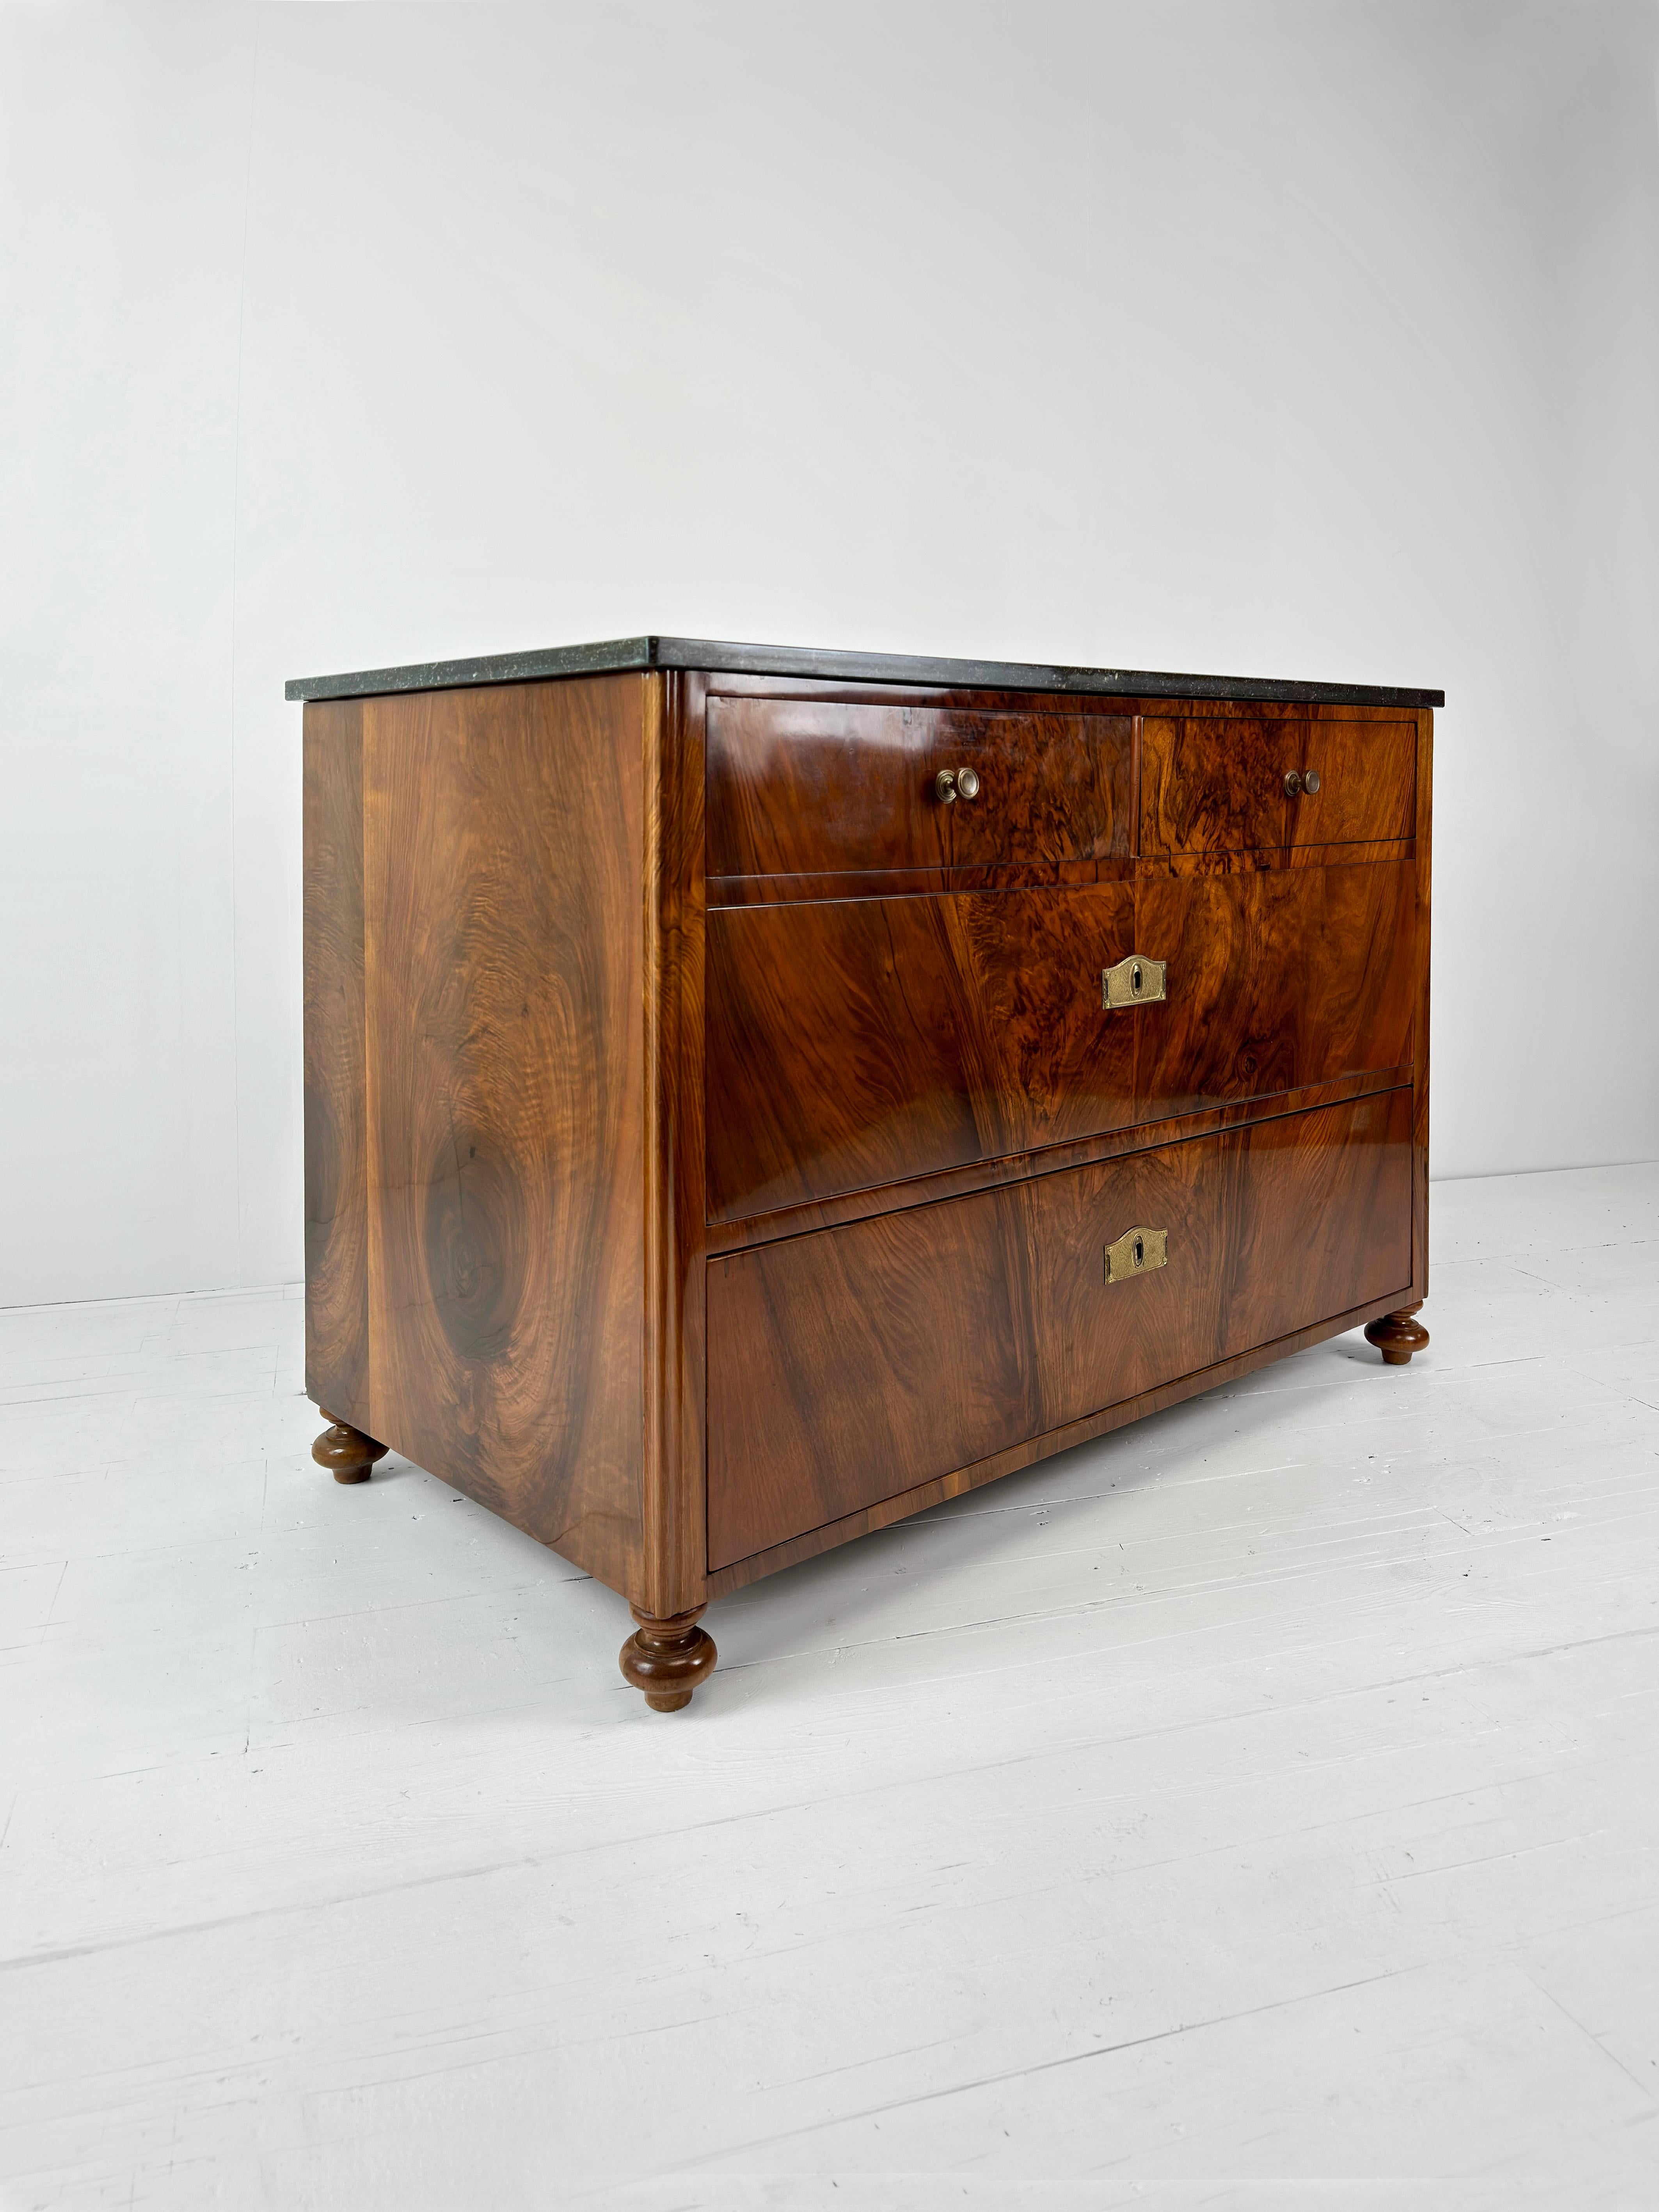 An absolutely stunning example of an Art Deco French Commode, in a highly character grain walnut timber. The marble top id a green with white speckled variety and the feet are also turned timber. The keyholes for the two wide drawers have Brass